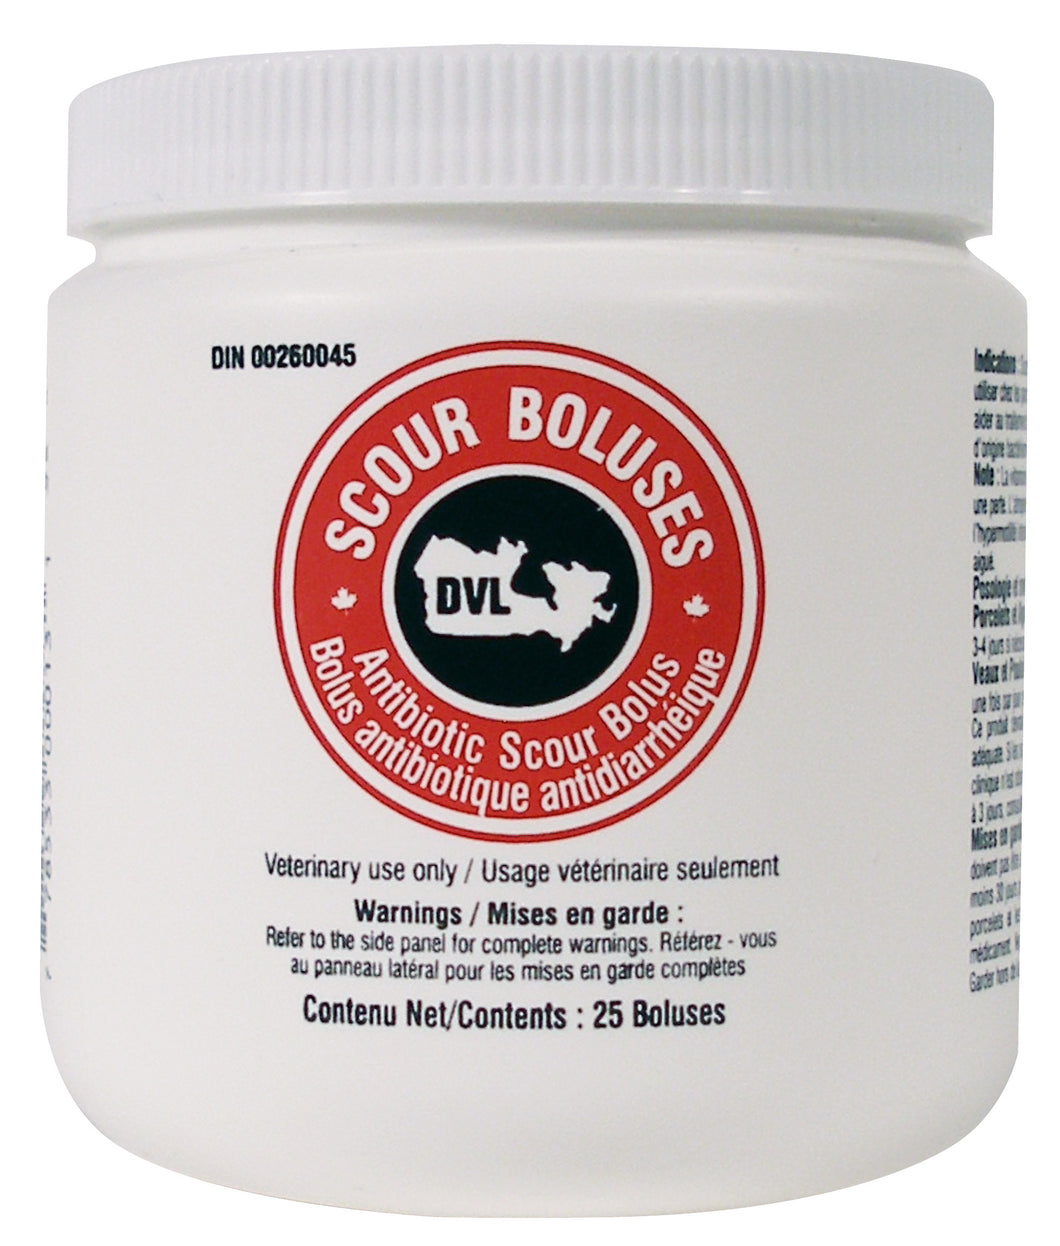 CALF SCOUR BOLUSES,  25's.  Cattle supply treatment of bacterial diarrhea and enteritis.